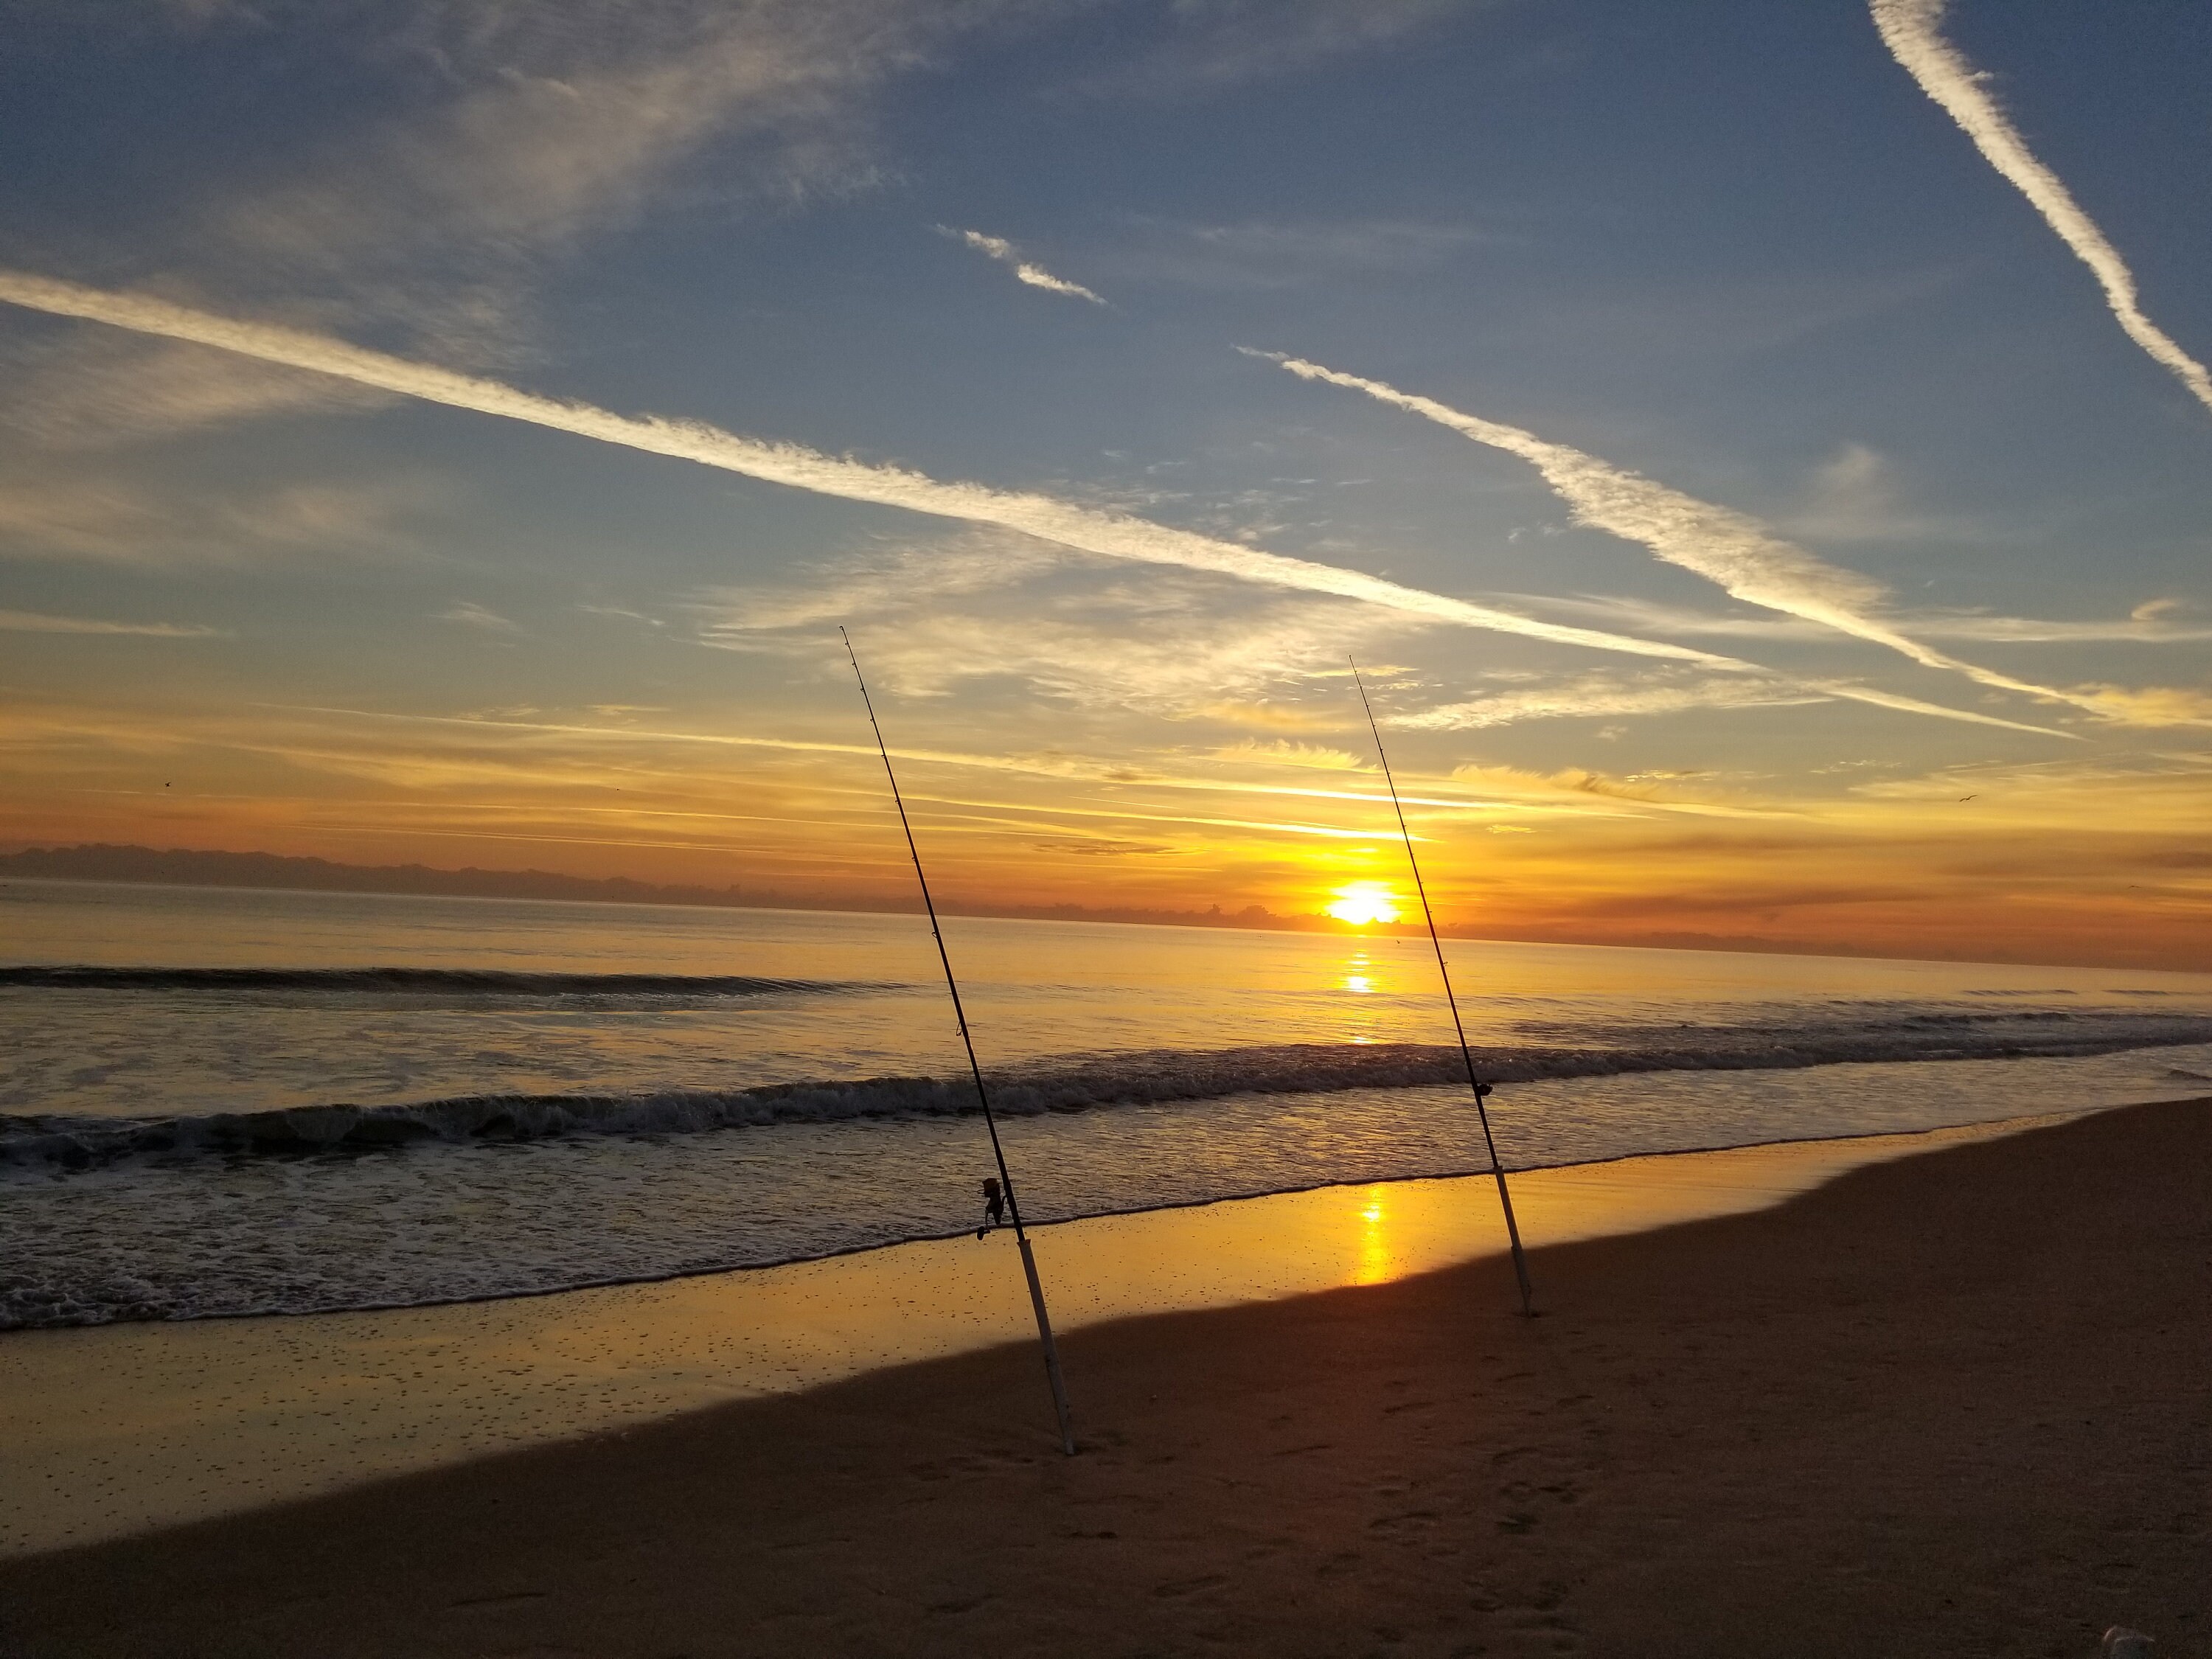 10 Hi-low Surf Fishing Rigs. Pompano, Whiting, Drum, Spots